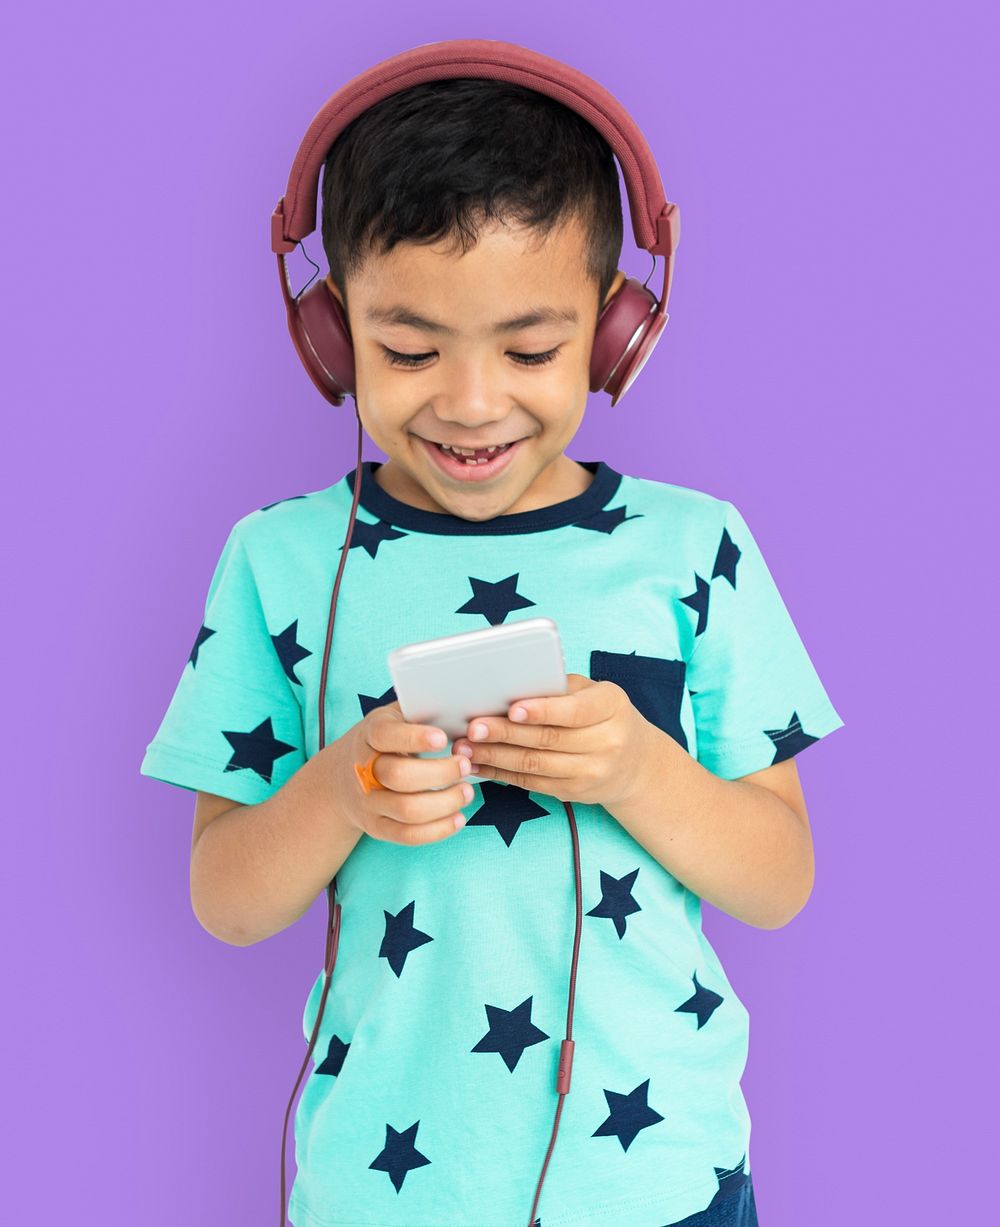 Young boy listening to music on his mobile